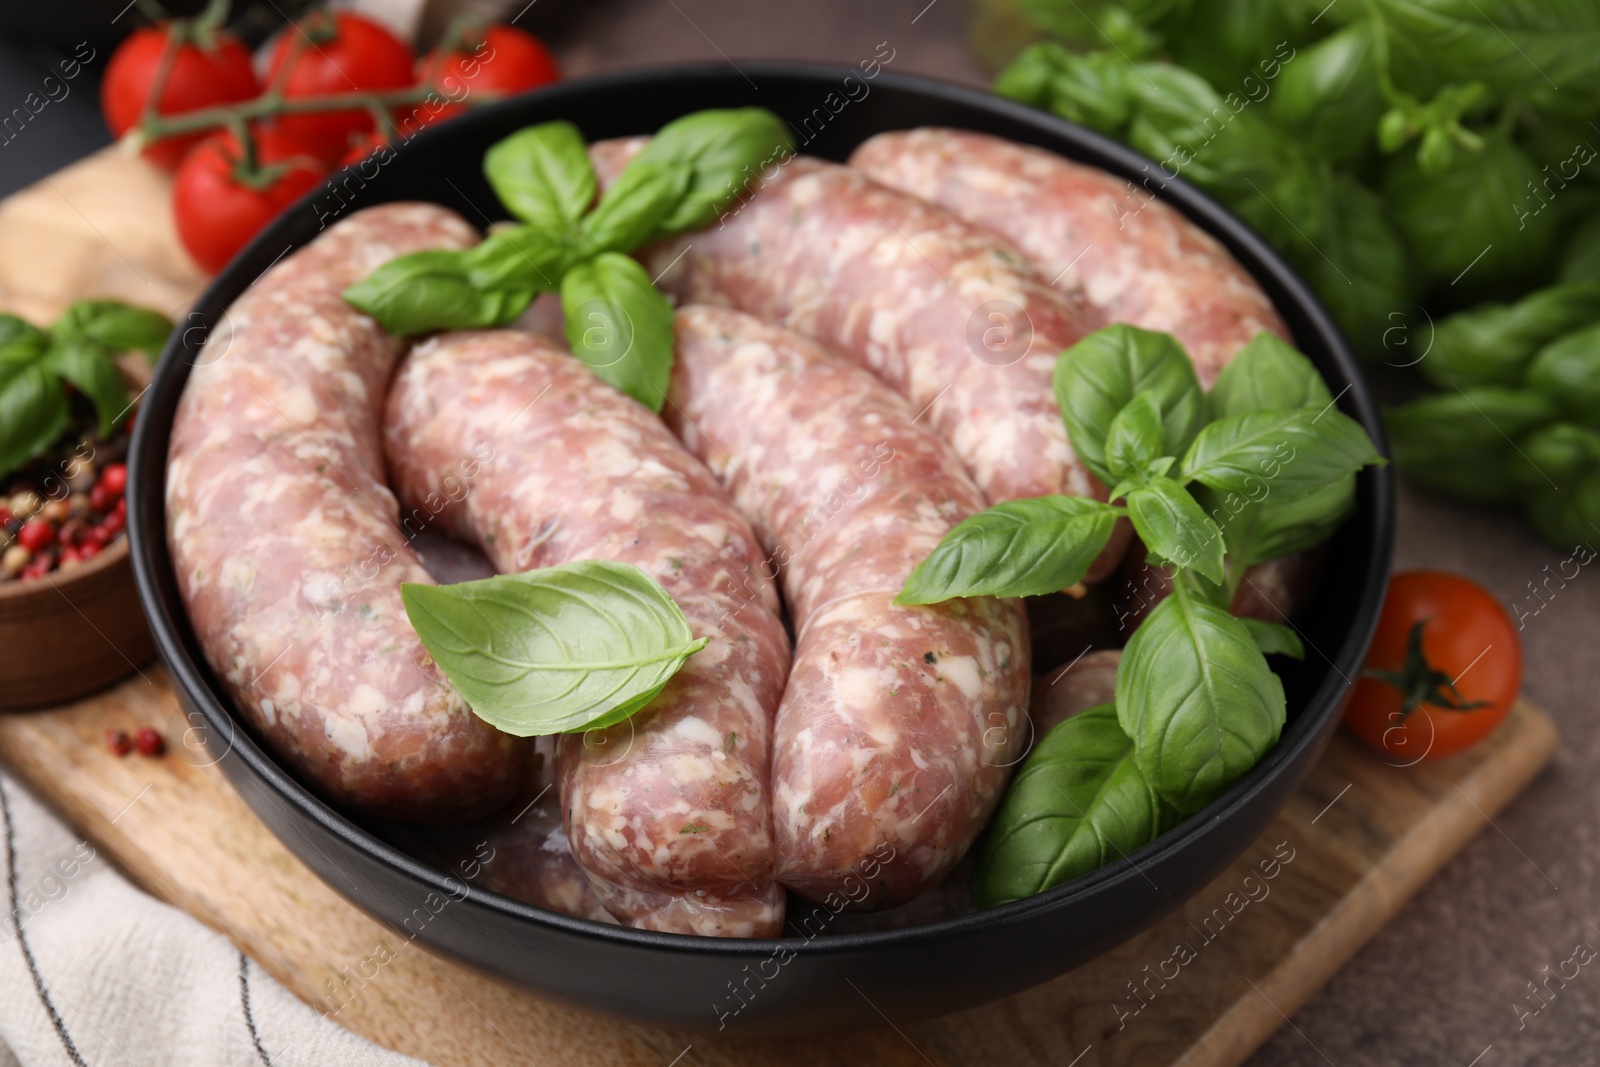 Photo of Raw homemade sausages and basil leaves on table, closeup